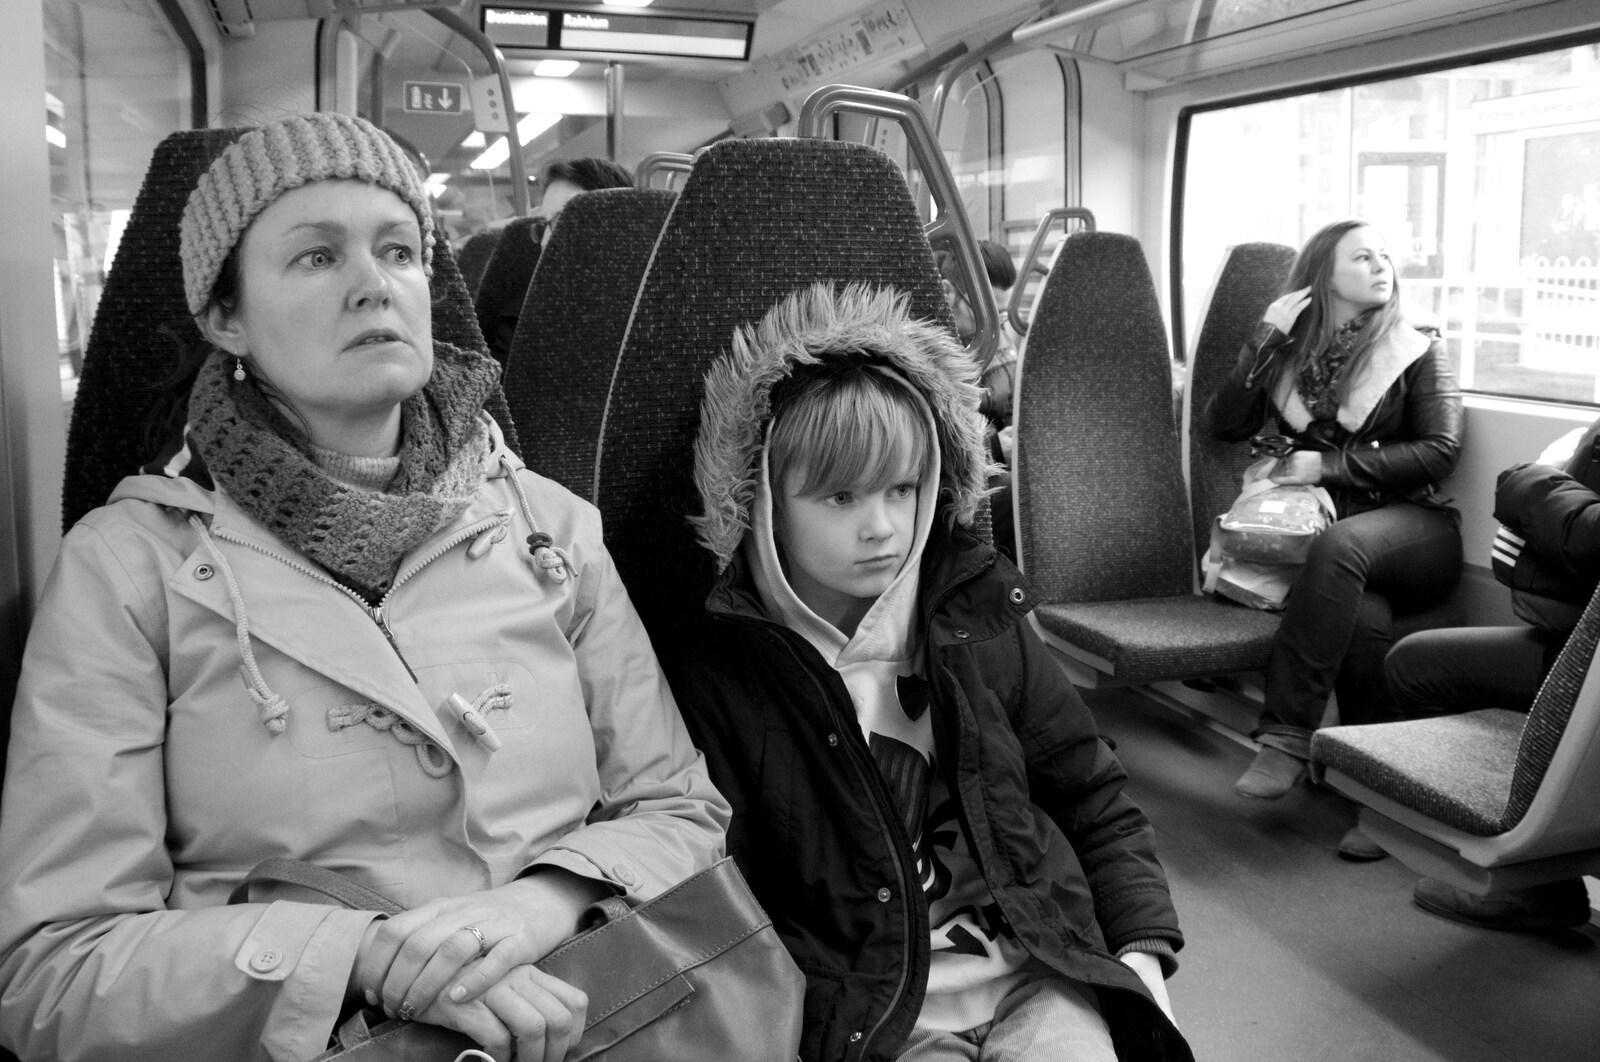 Isobel and Harry on the train from HMS Belfast and the South Bank, Southwark, London - 17th February 2020